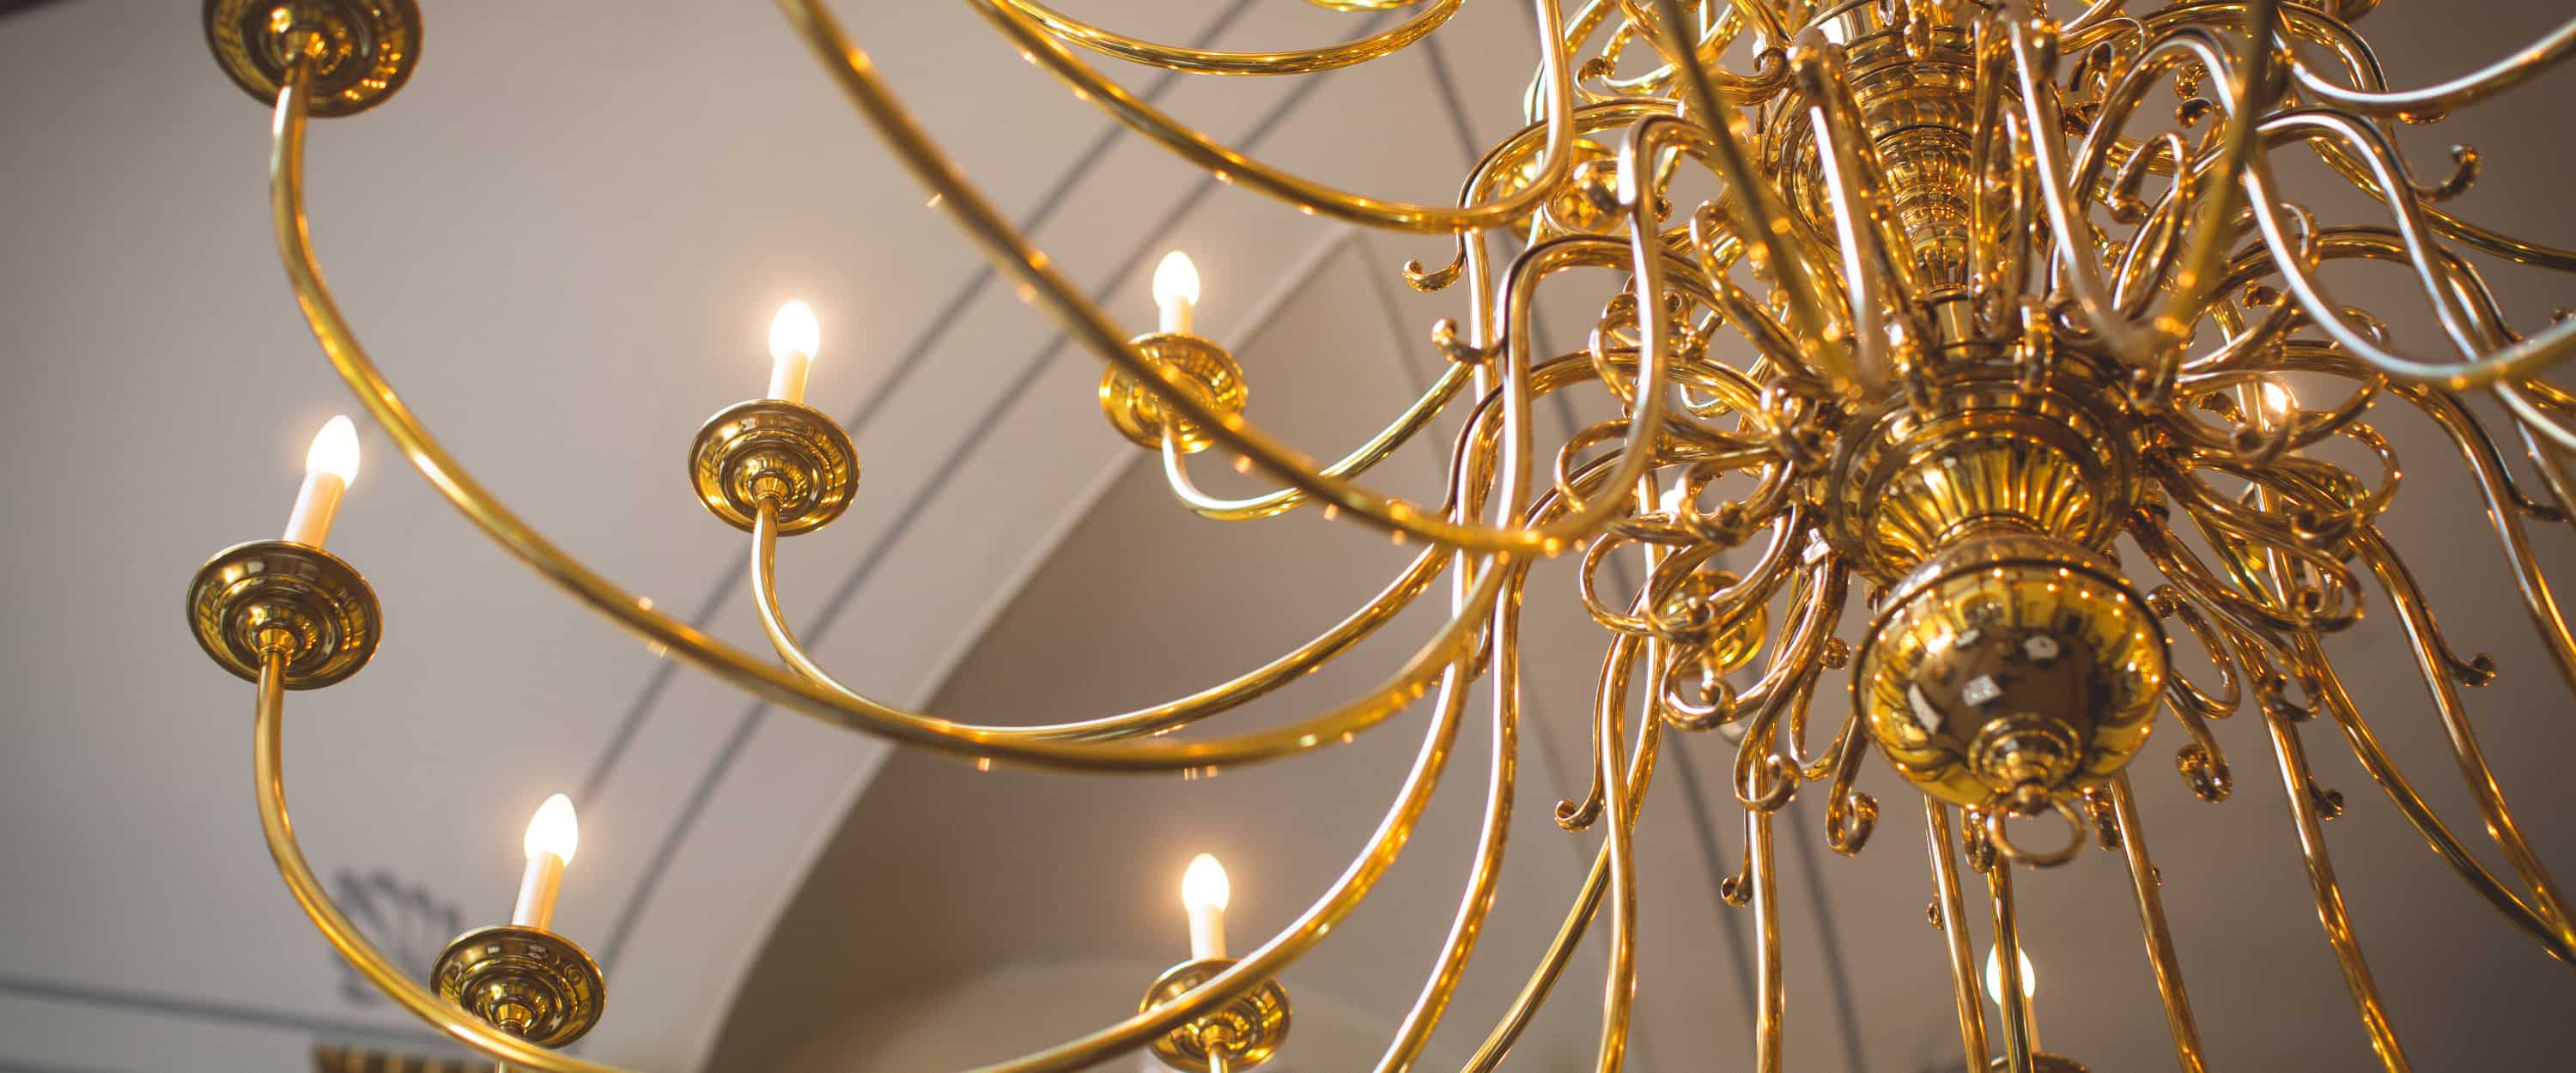 An ornate golden chandelier with lit bulbs against a soft-focus background.